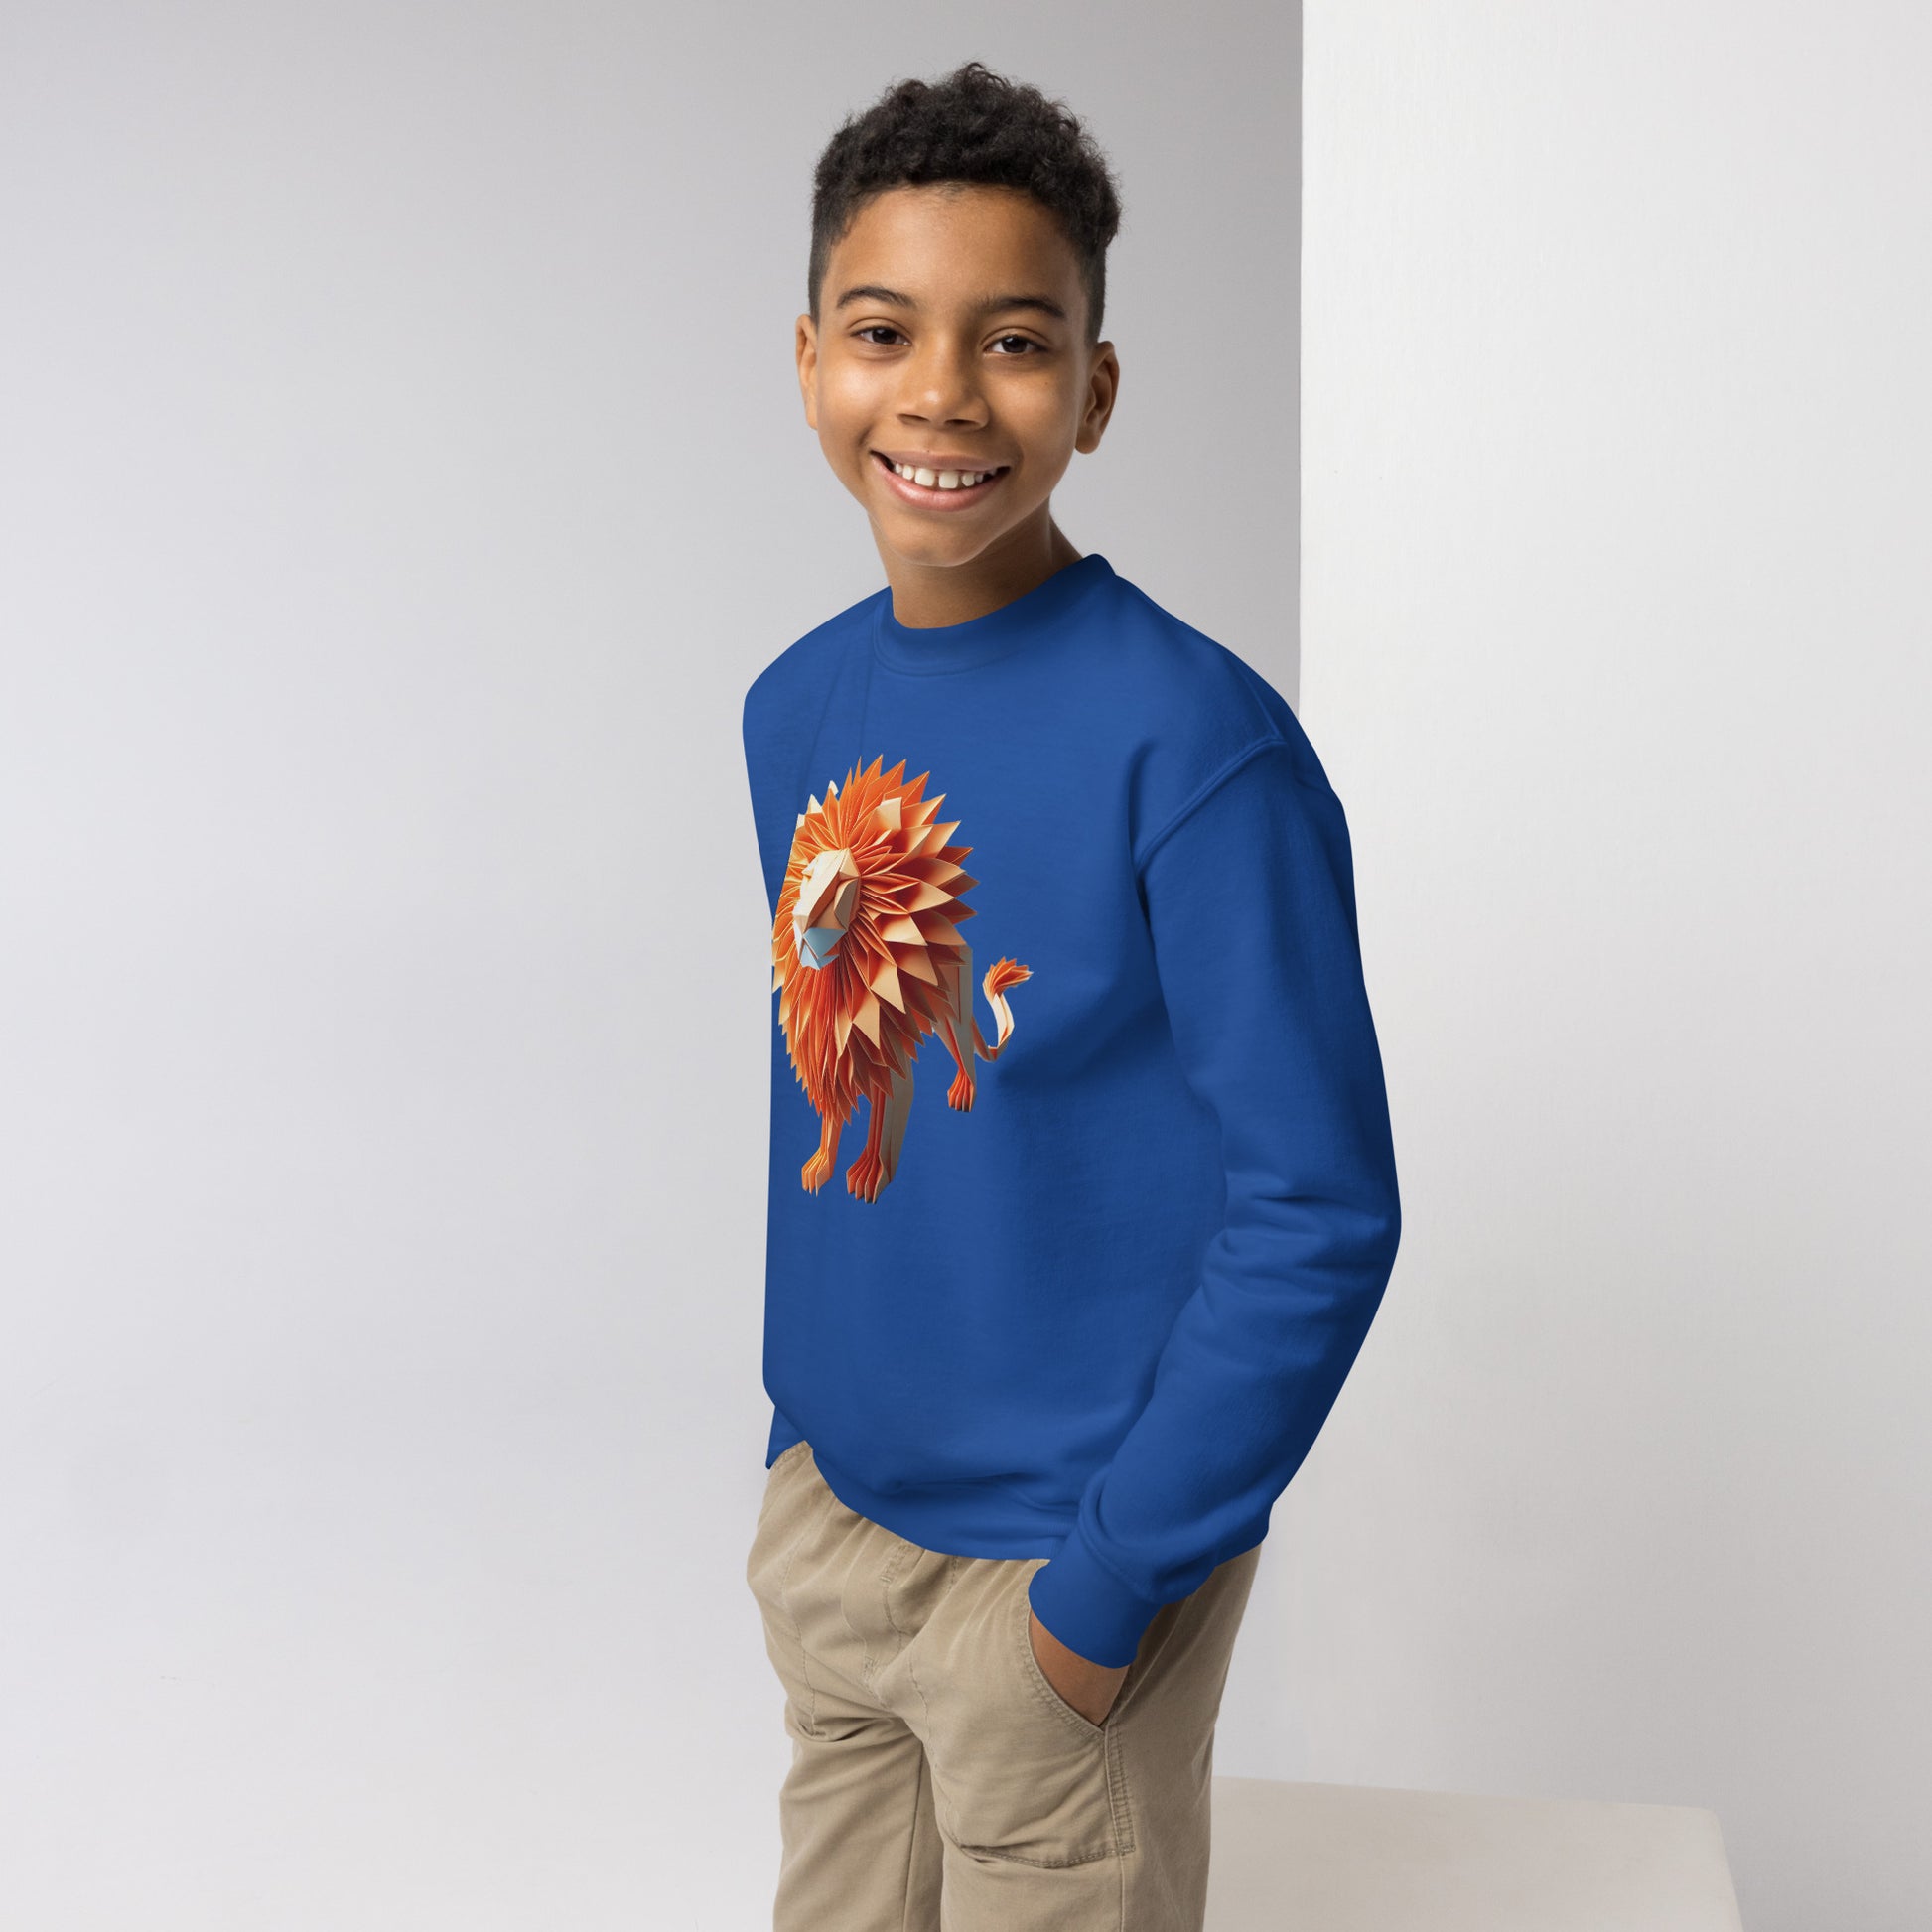 Youth with royal blue Sweater with print of a lion